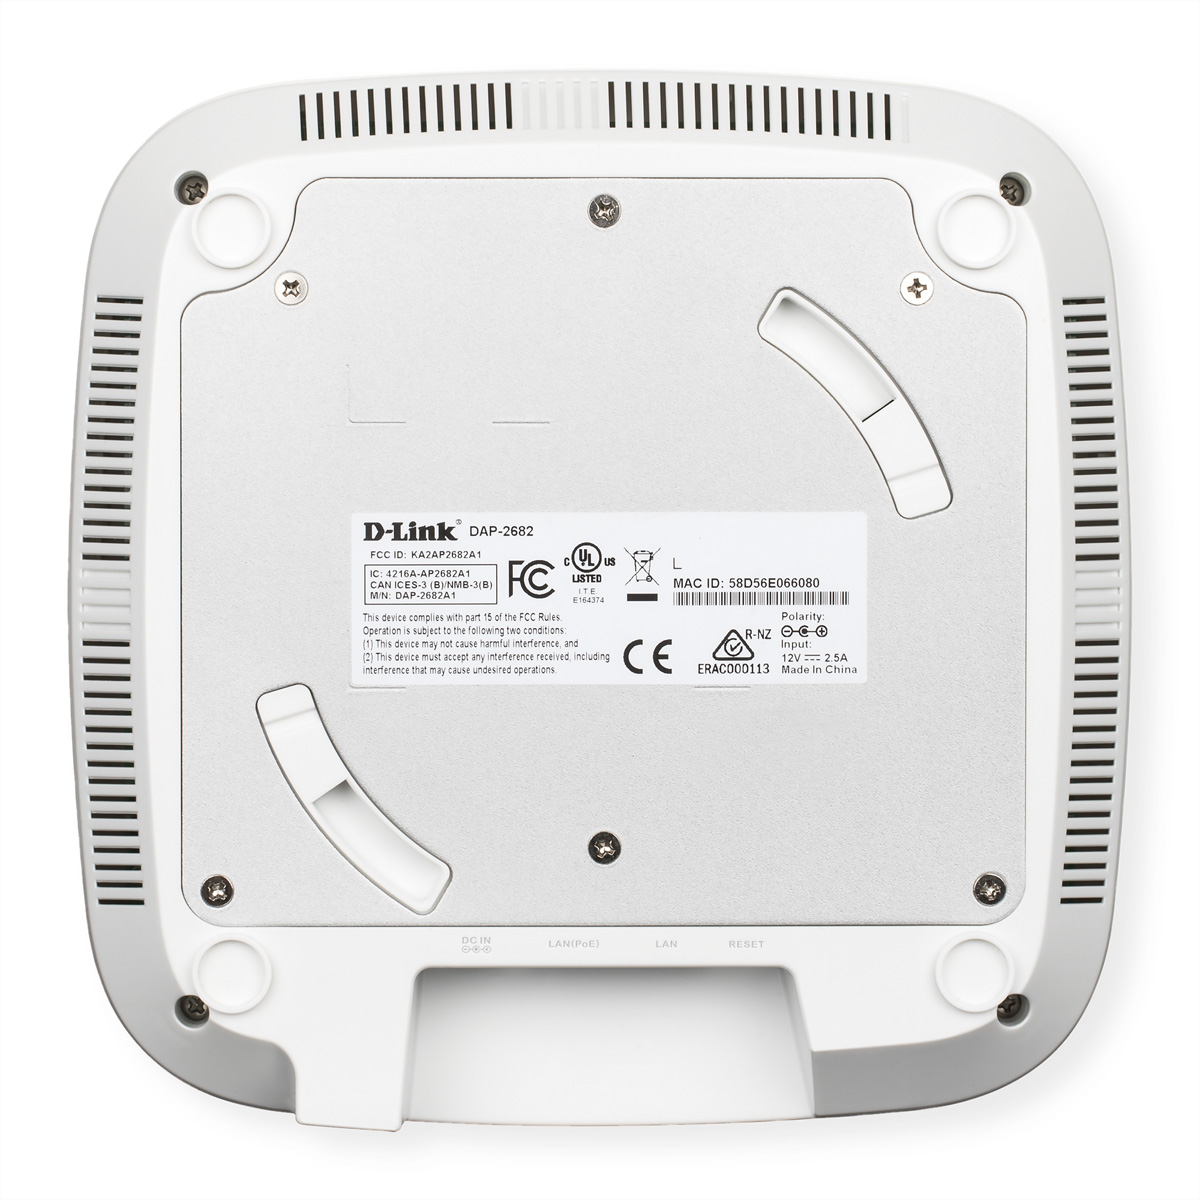 2 2,3 DAP-2682 Point AC2300 Wireless D-LINK Dual-Band Gbit/s Access Points PoE Access Wave